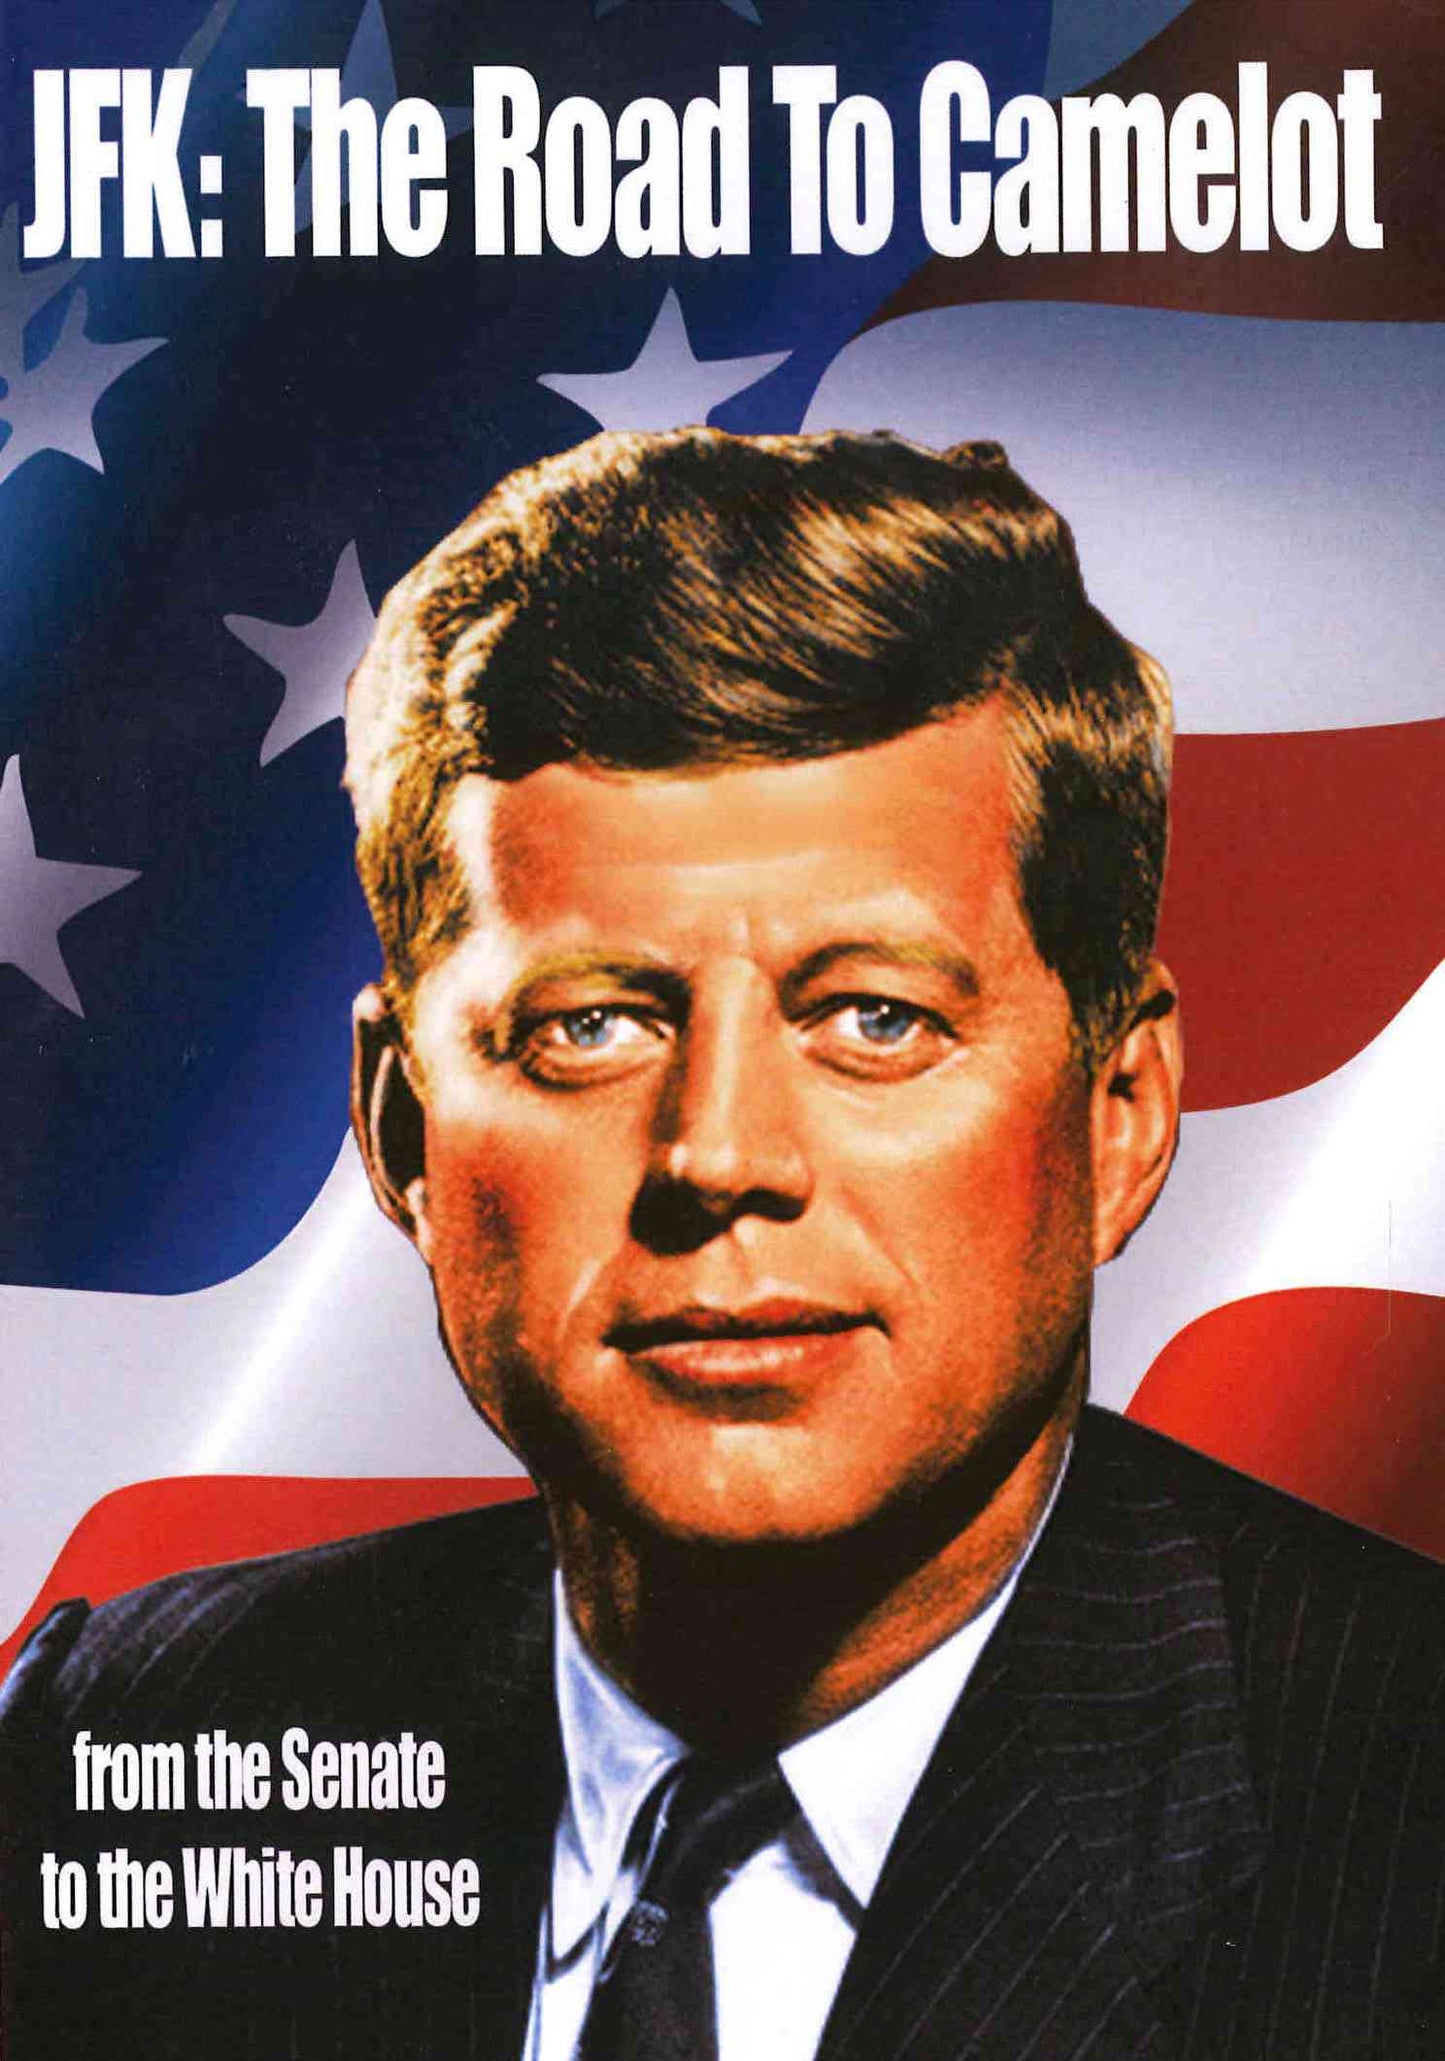 JFK: The Road to Camelot cover art